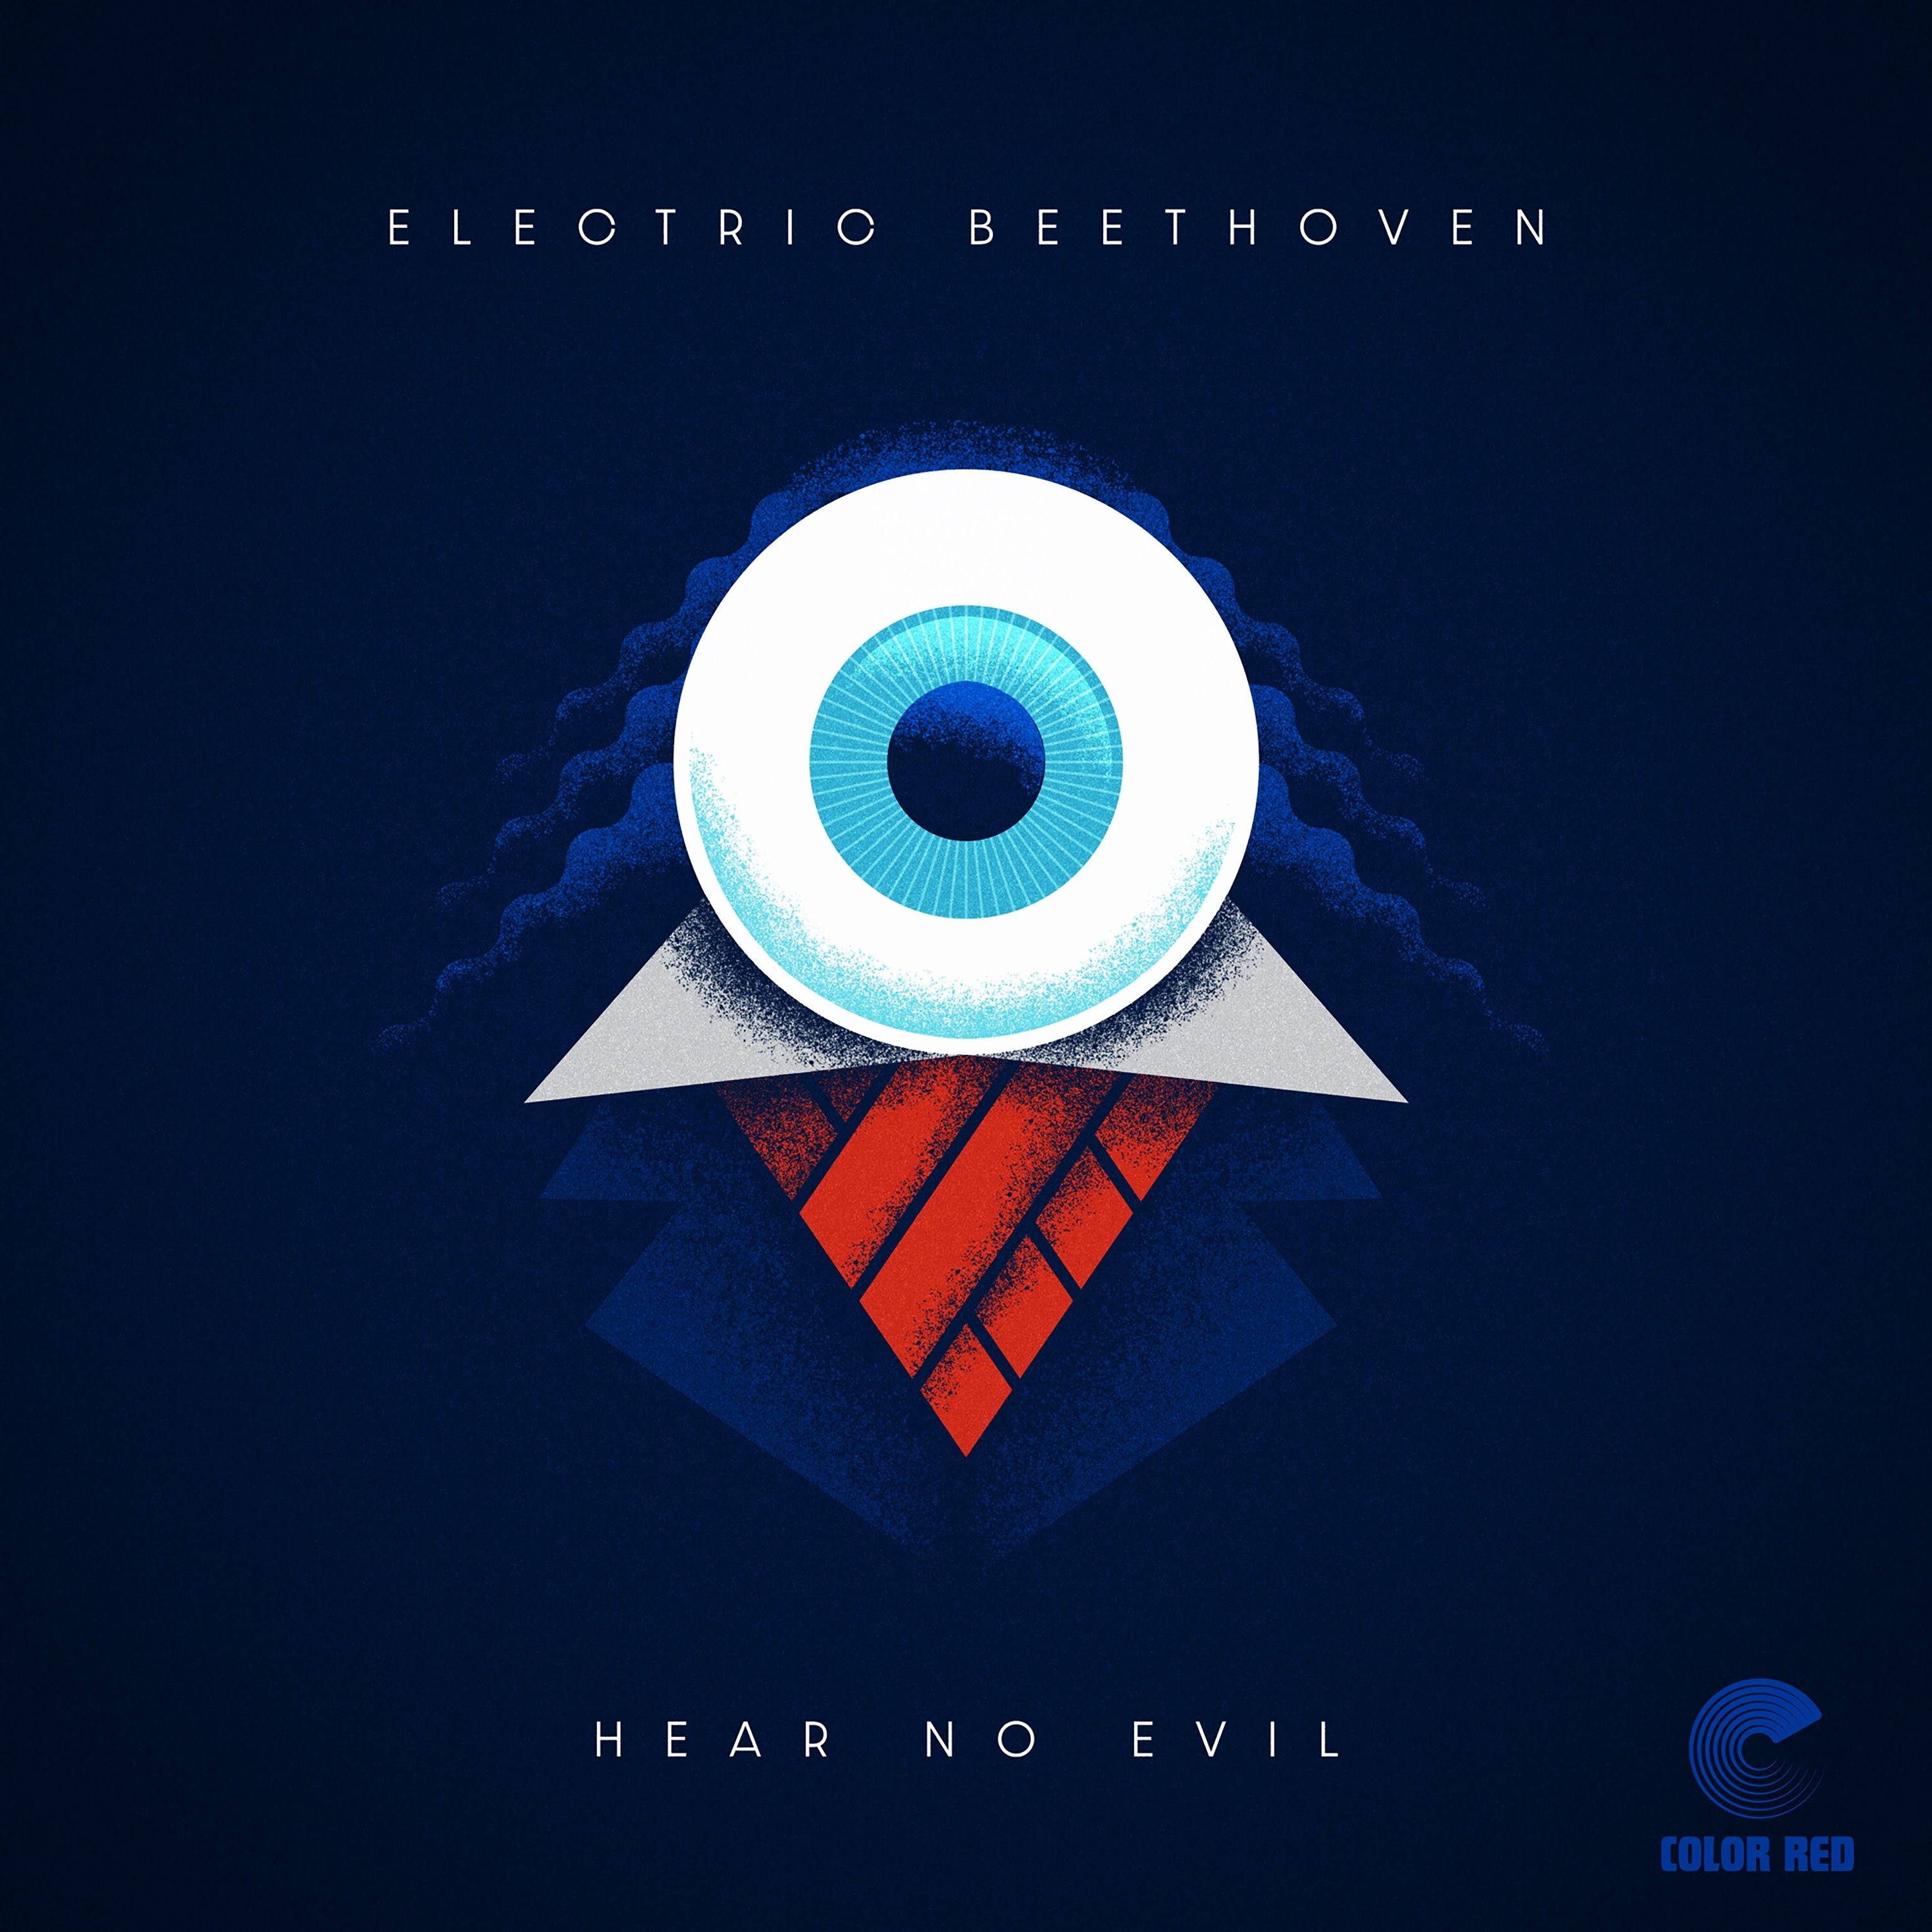 Electric Beethoven Releases Long-Awaited Double LP 'Hear No Evil'